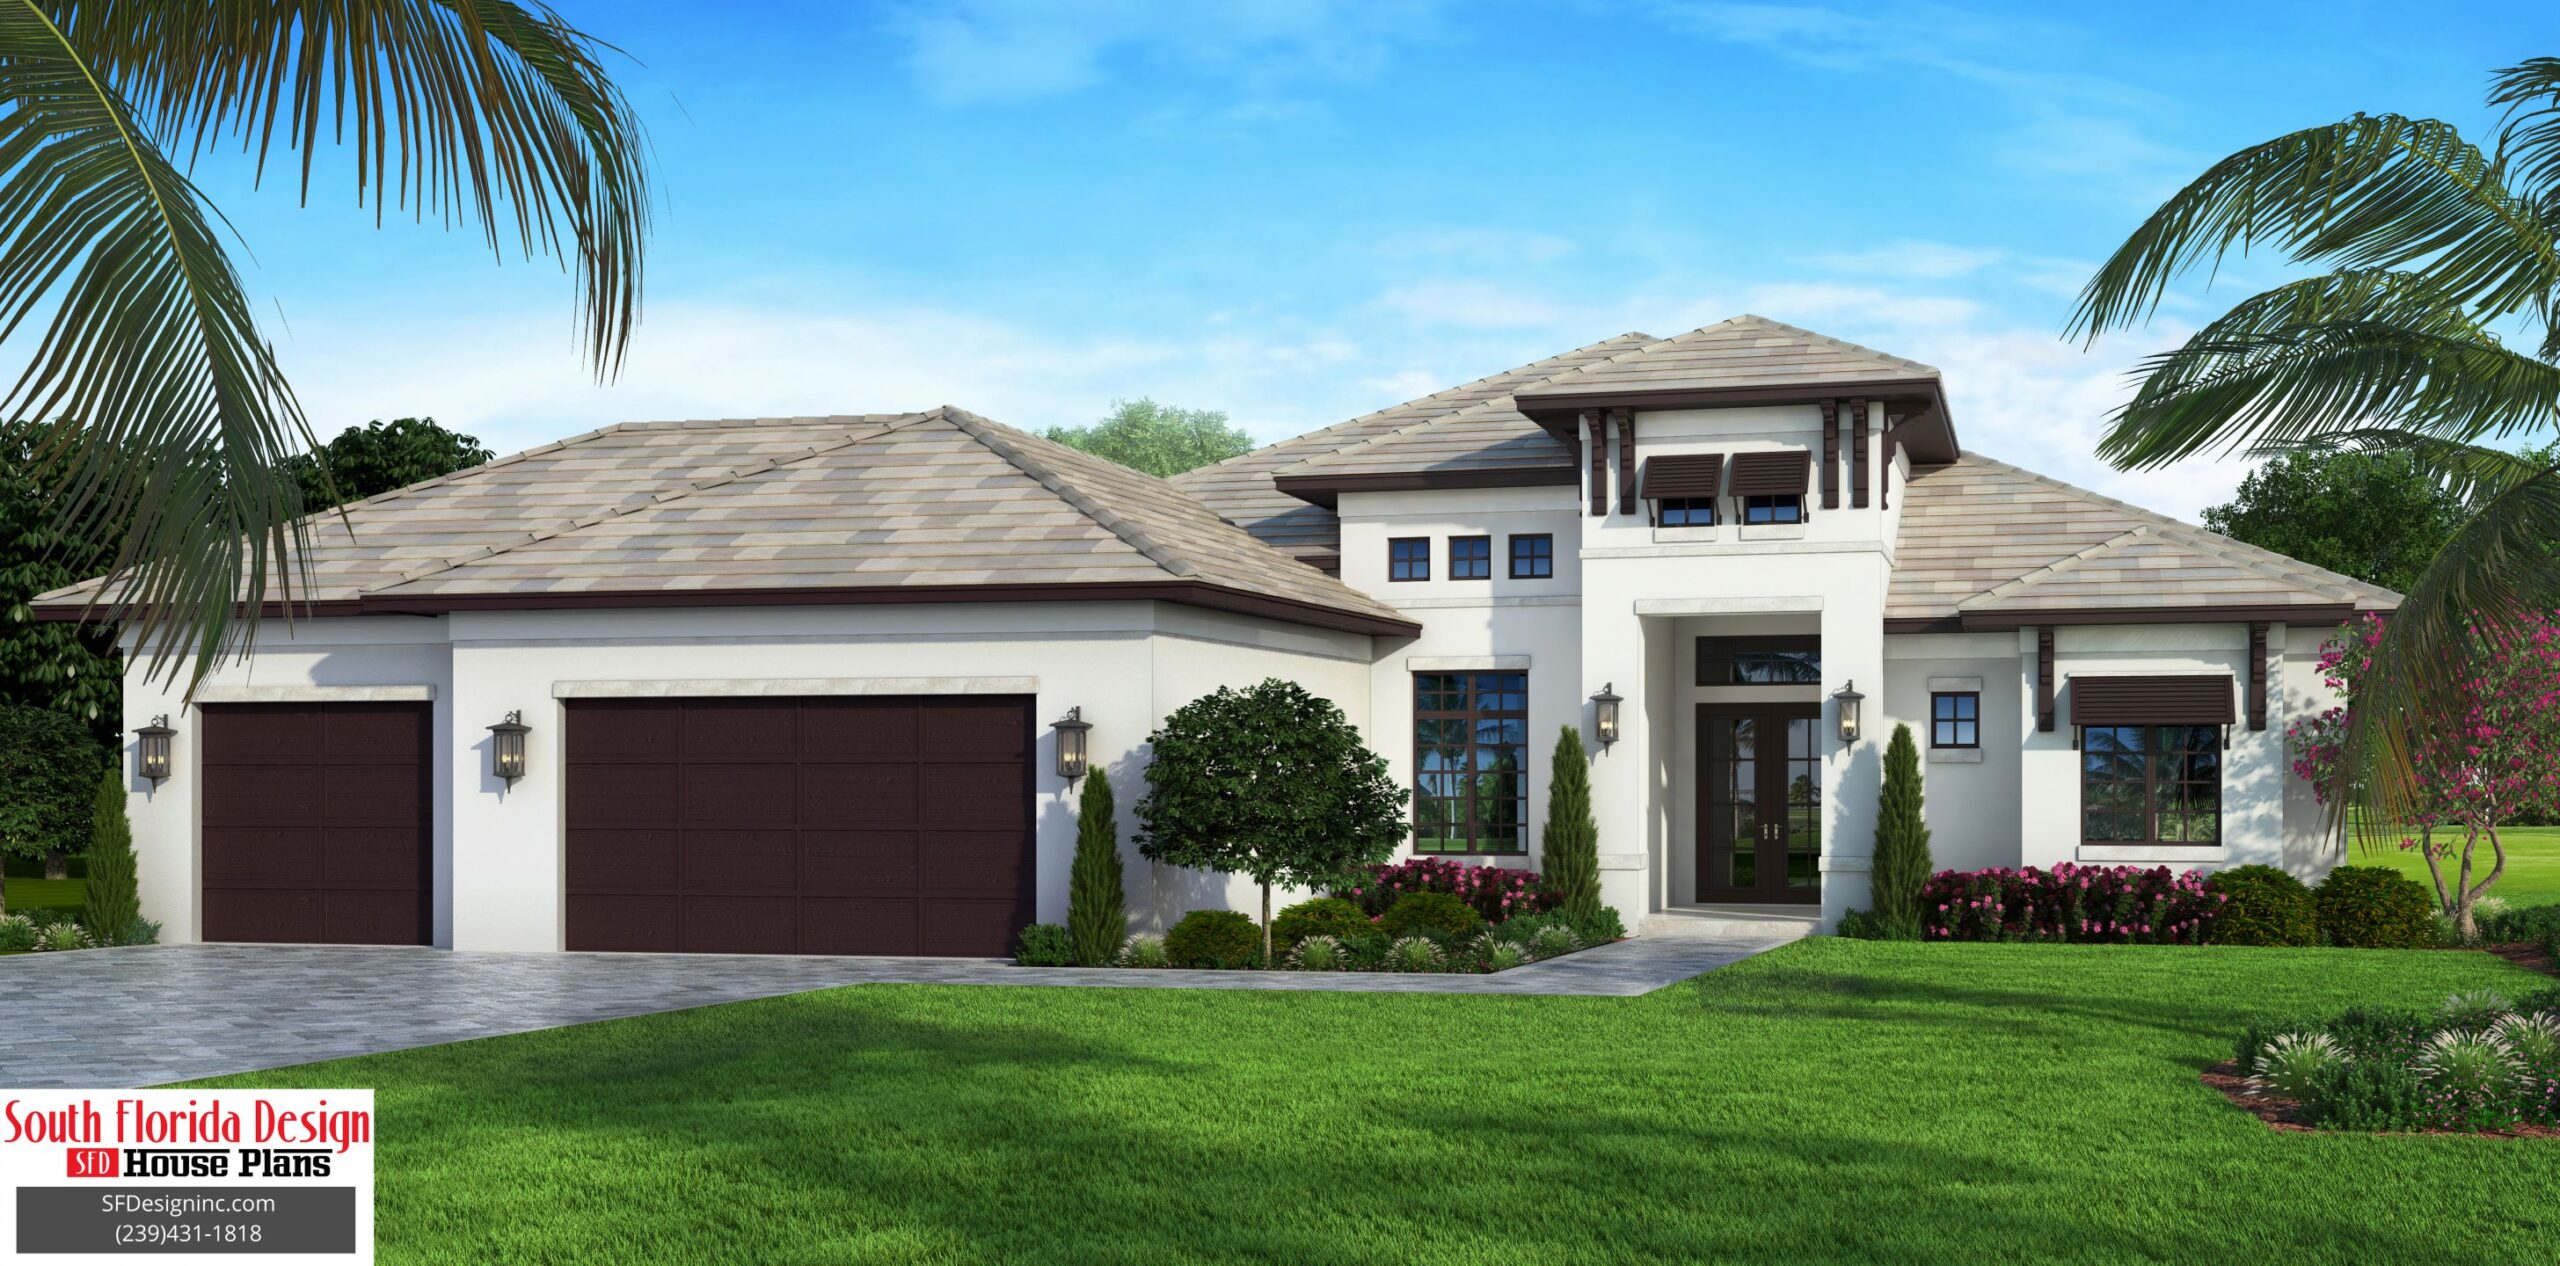 Color front elevation rendering of a 2400sf 1-story house plan